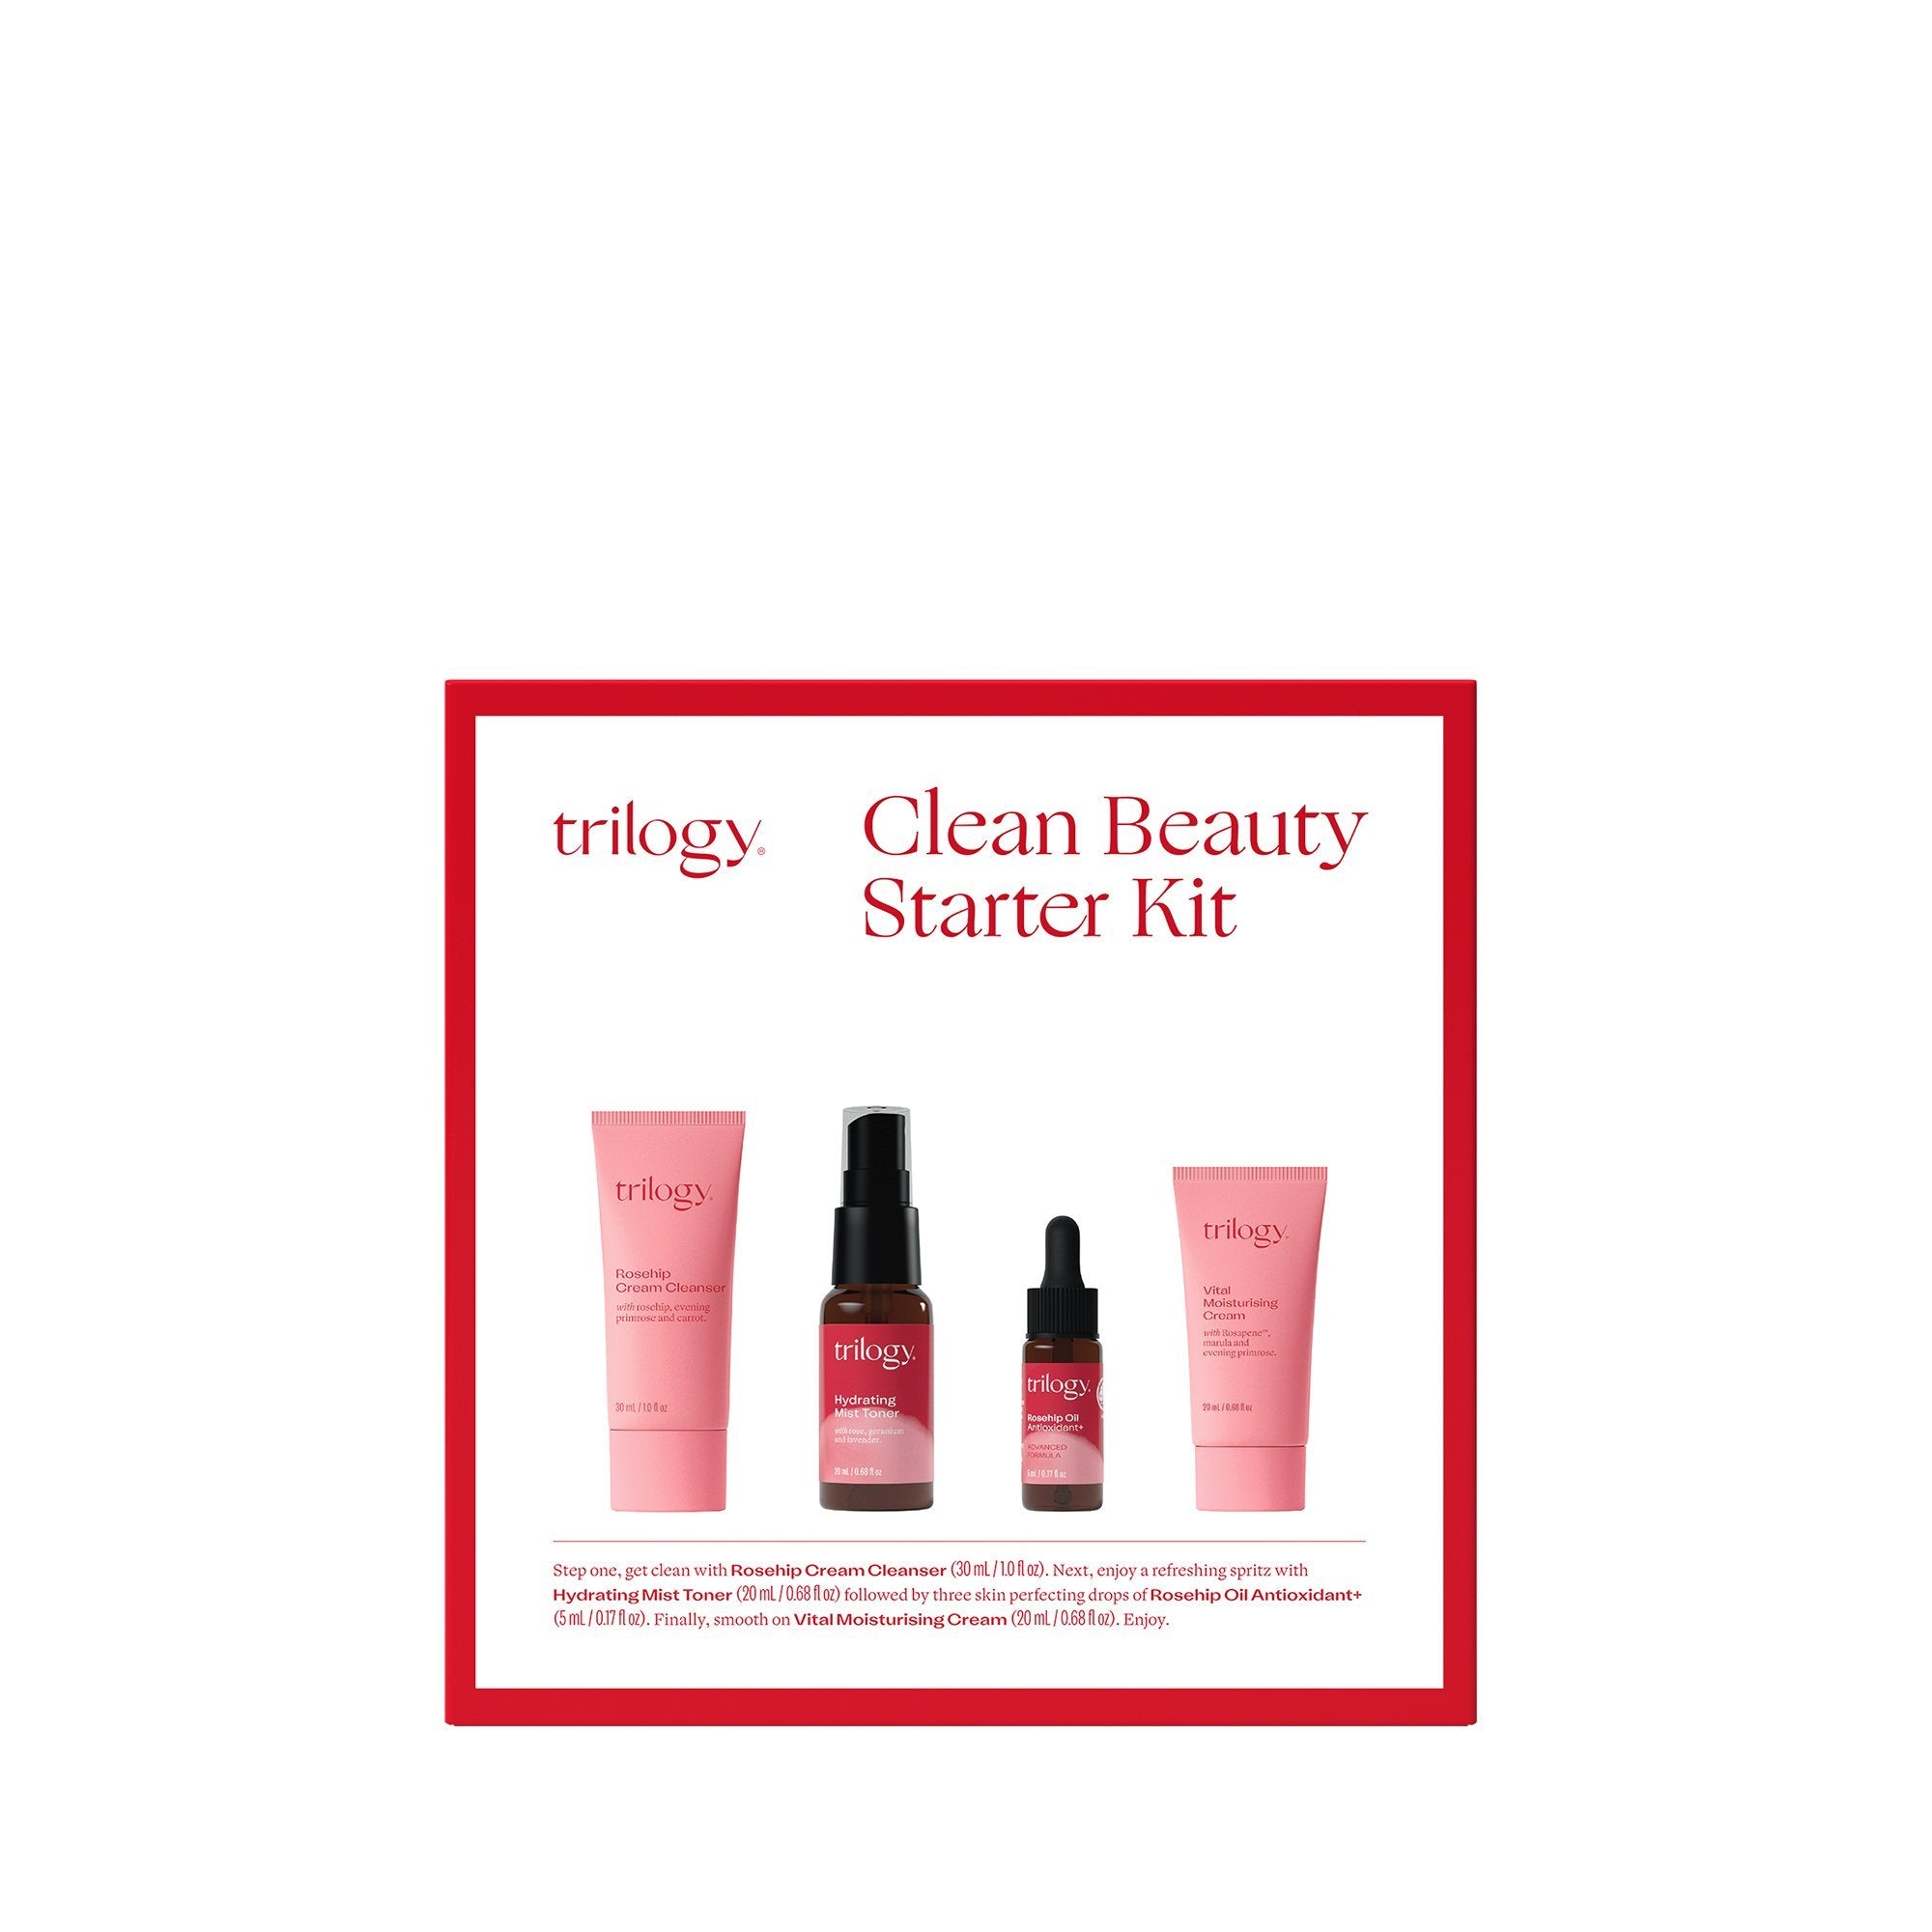 Limited Edition Clean Beauty Starter Kit